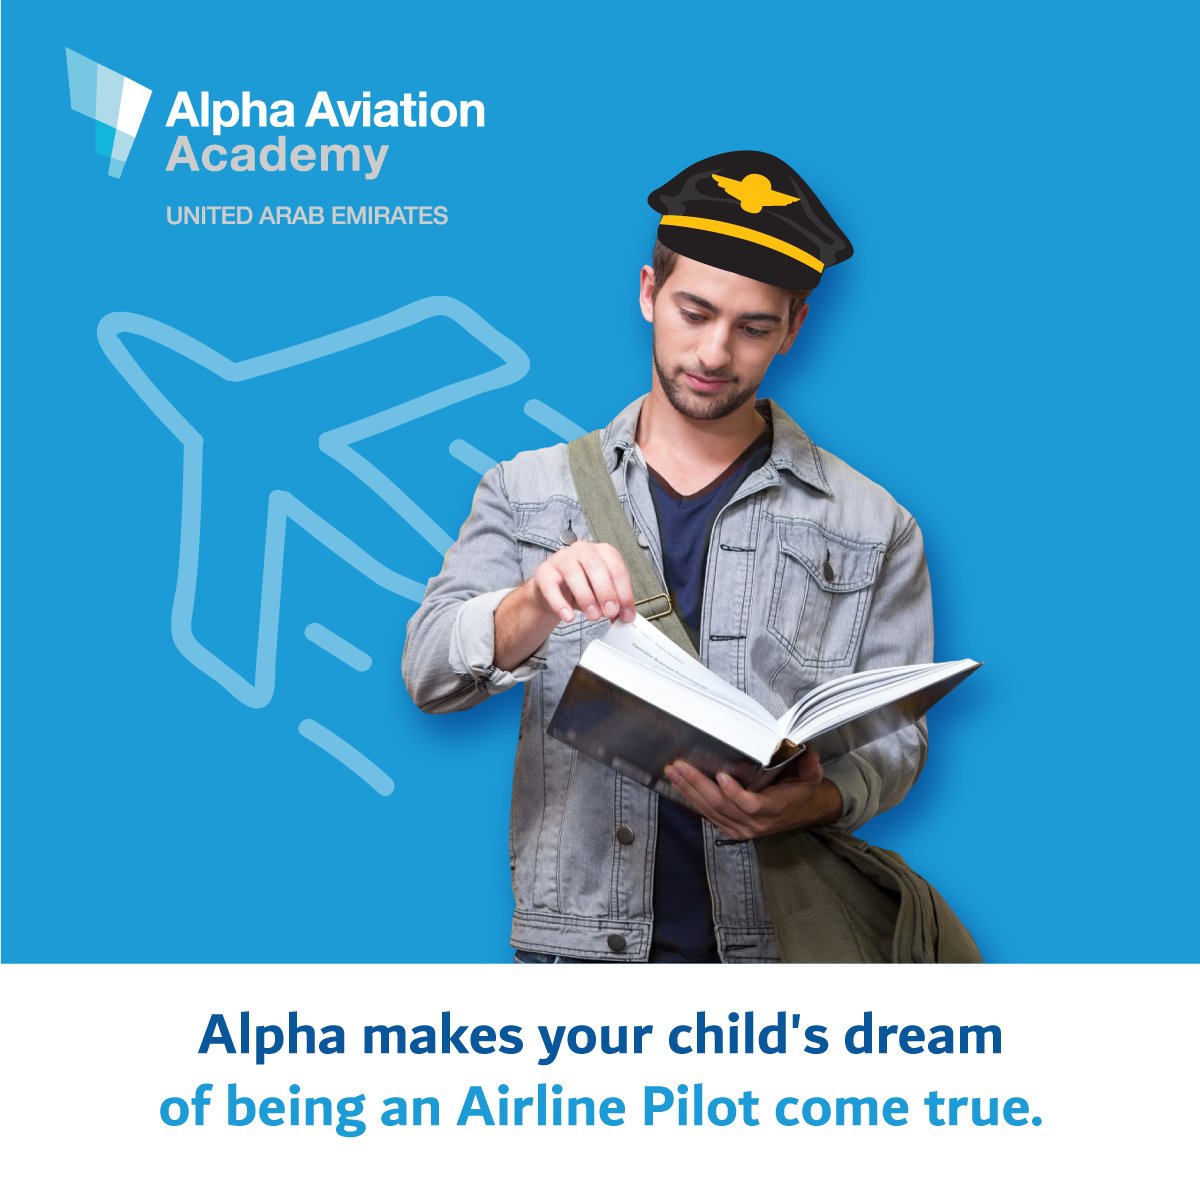 Alpha: making your child's dream of becoming an Airline Pilot come true.

For more information on our Pilot Training Programme, contact us on info@alphaacademyuae.com or +971 6 508 8360.#AlphaAviationAcademy #AlphaAviationAcademyUAE #NewYear #NewYearChallenge #NewYear2020 #pilot